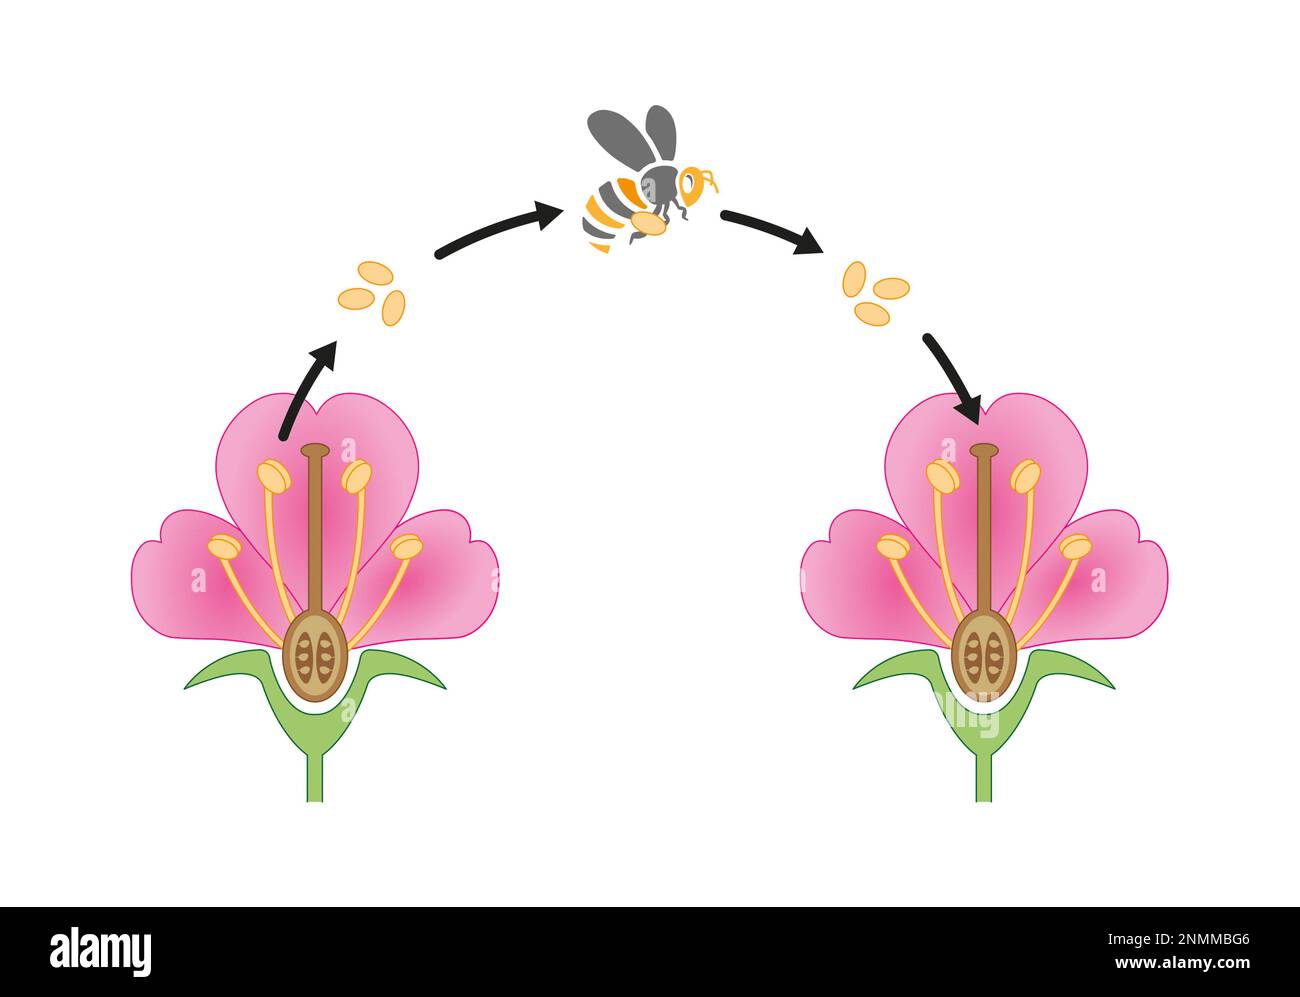 Insect pollination, illustration Stock Photo